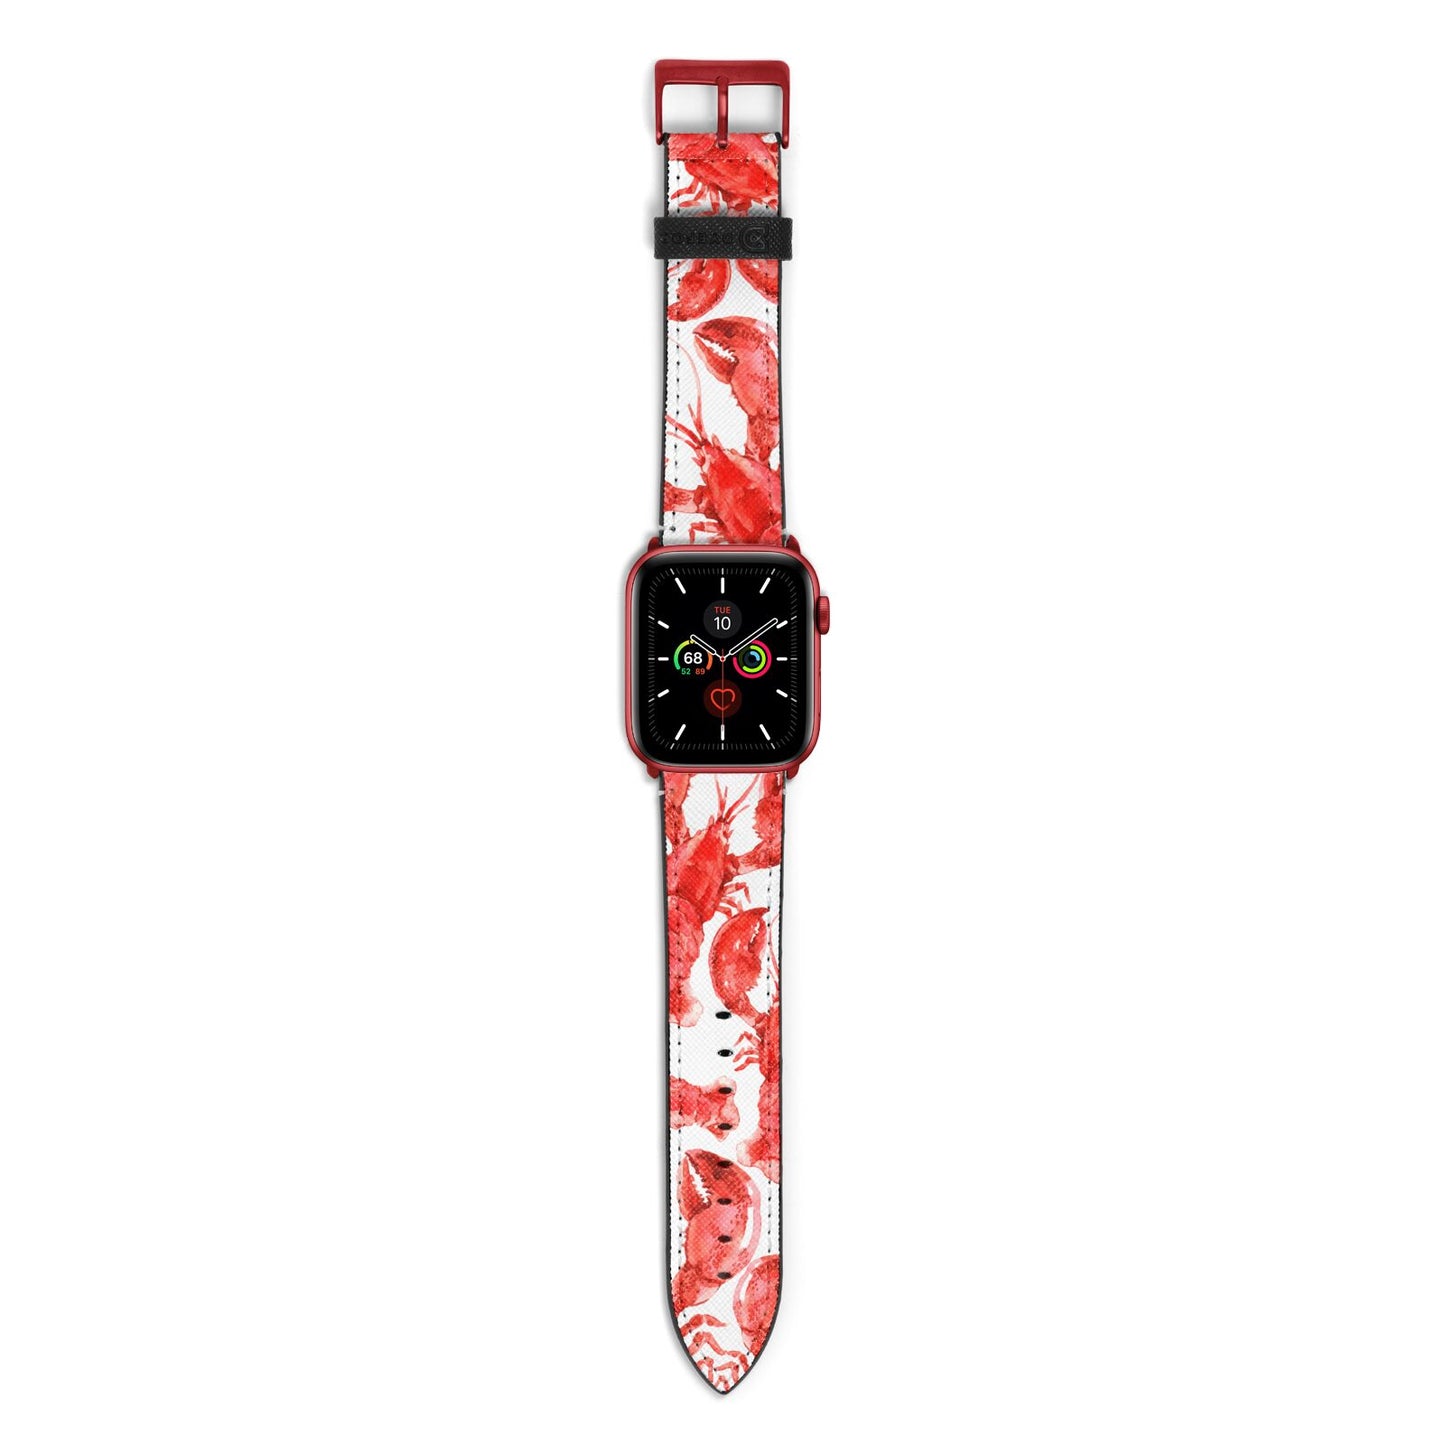 Lobster Apple Watch Strap with Red Hardware